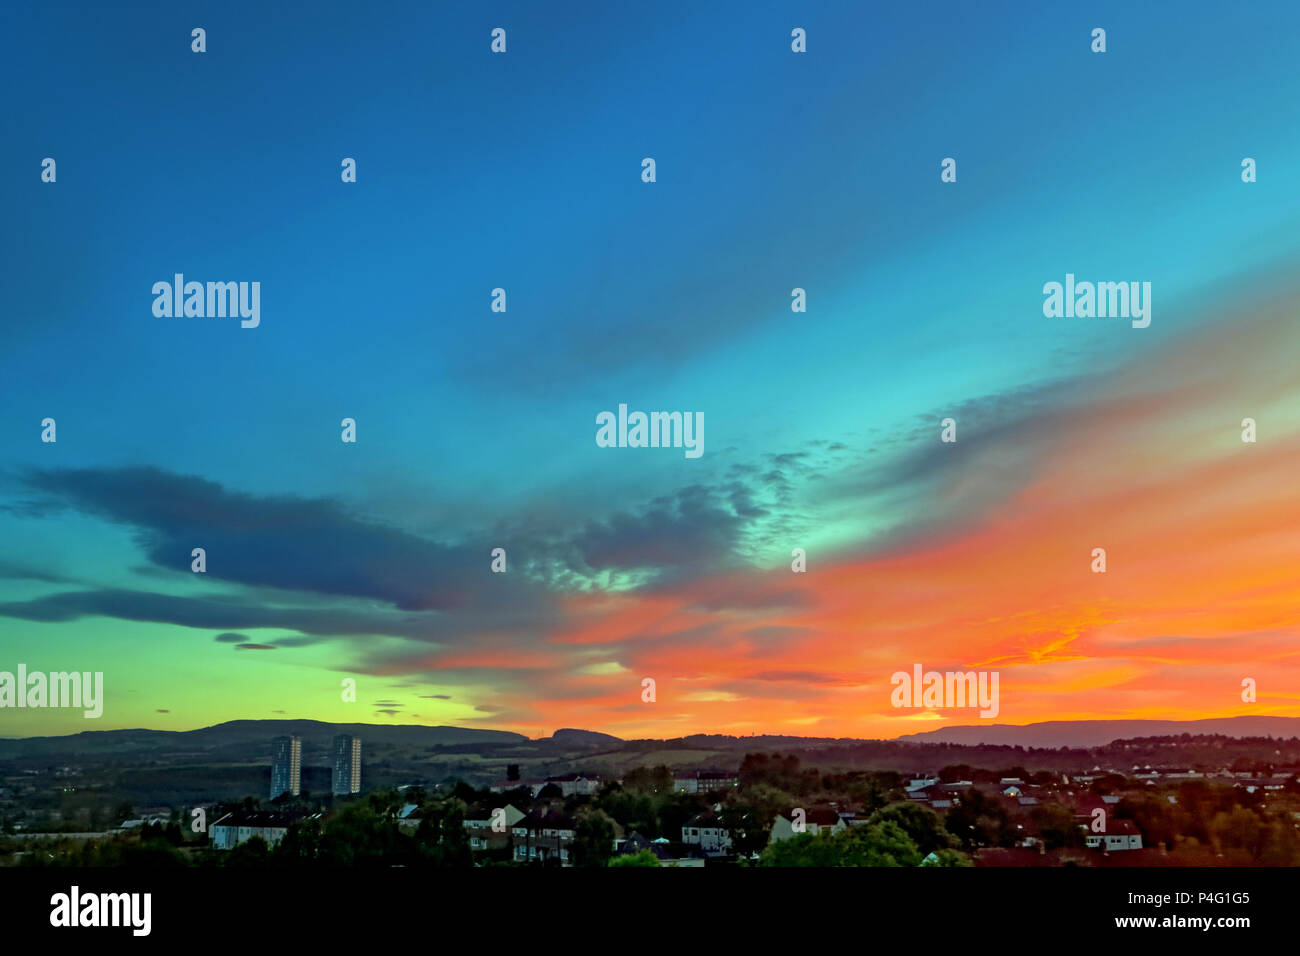 Glasgow, Scotland, UK 22nd June. UK Weather: Midsummer passes and a stunning  fiery sunrise for the beginning of summer over the Drumchapel housing scheme and Bearsden in the  North of the city hosts a bright red start with wavy cloud formations taking on the rosy hue. Gerard Ferry/Alamy news Stock Photo